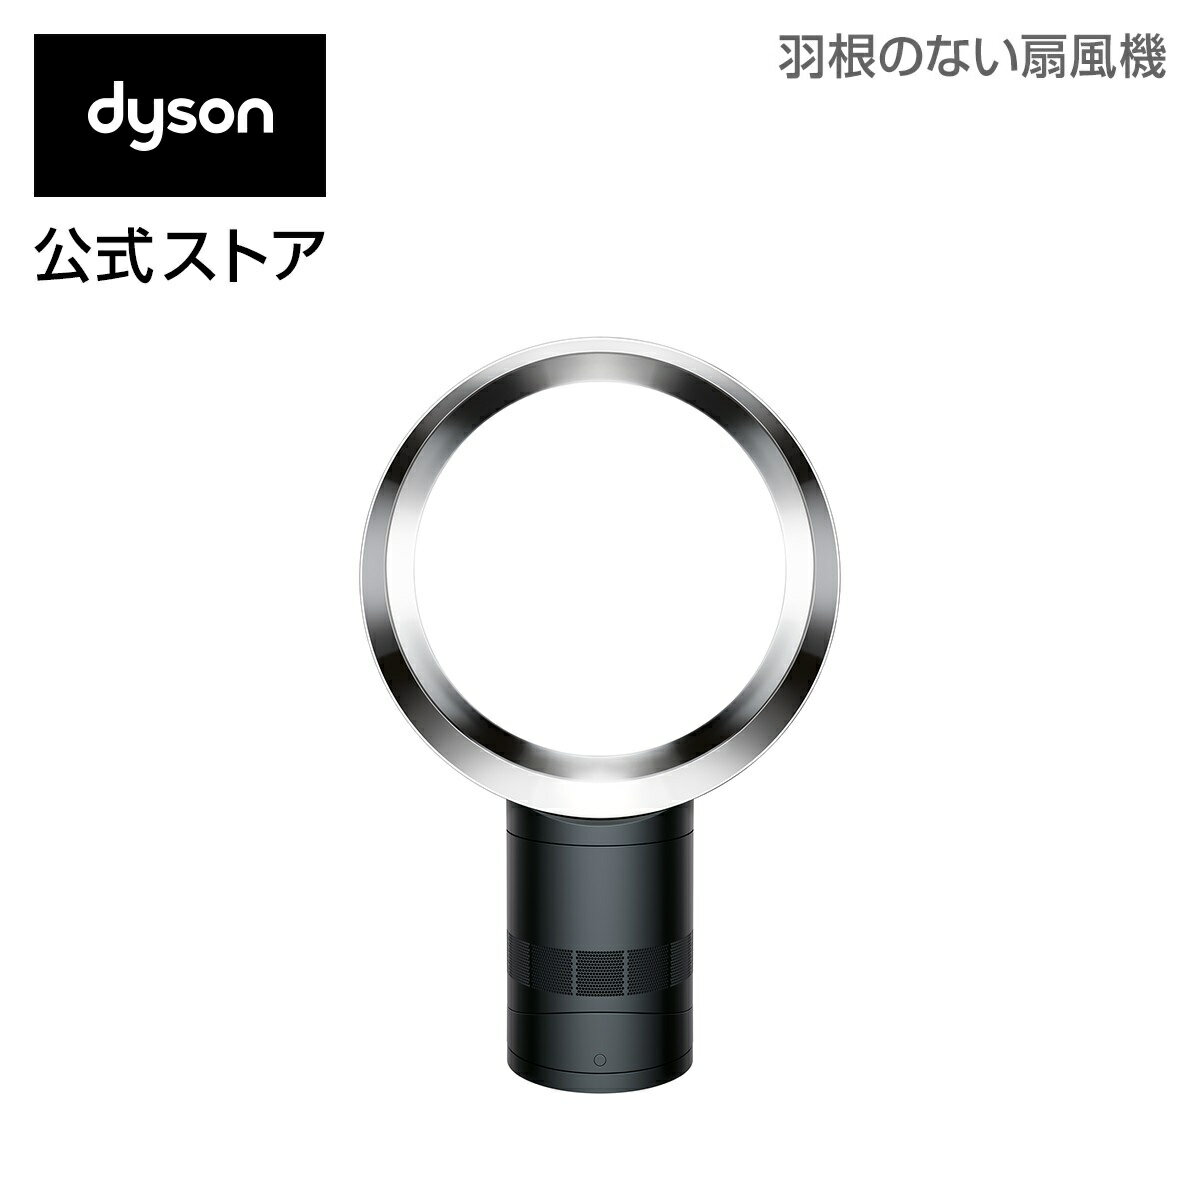 _C\ Dyson Pure Cool TP04 WS N C^[t@ @ zCg/Vo[